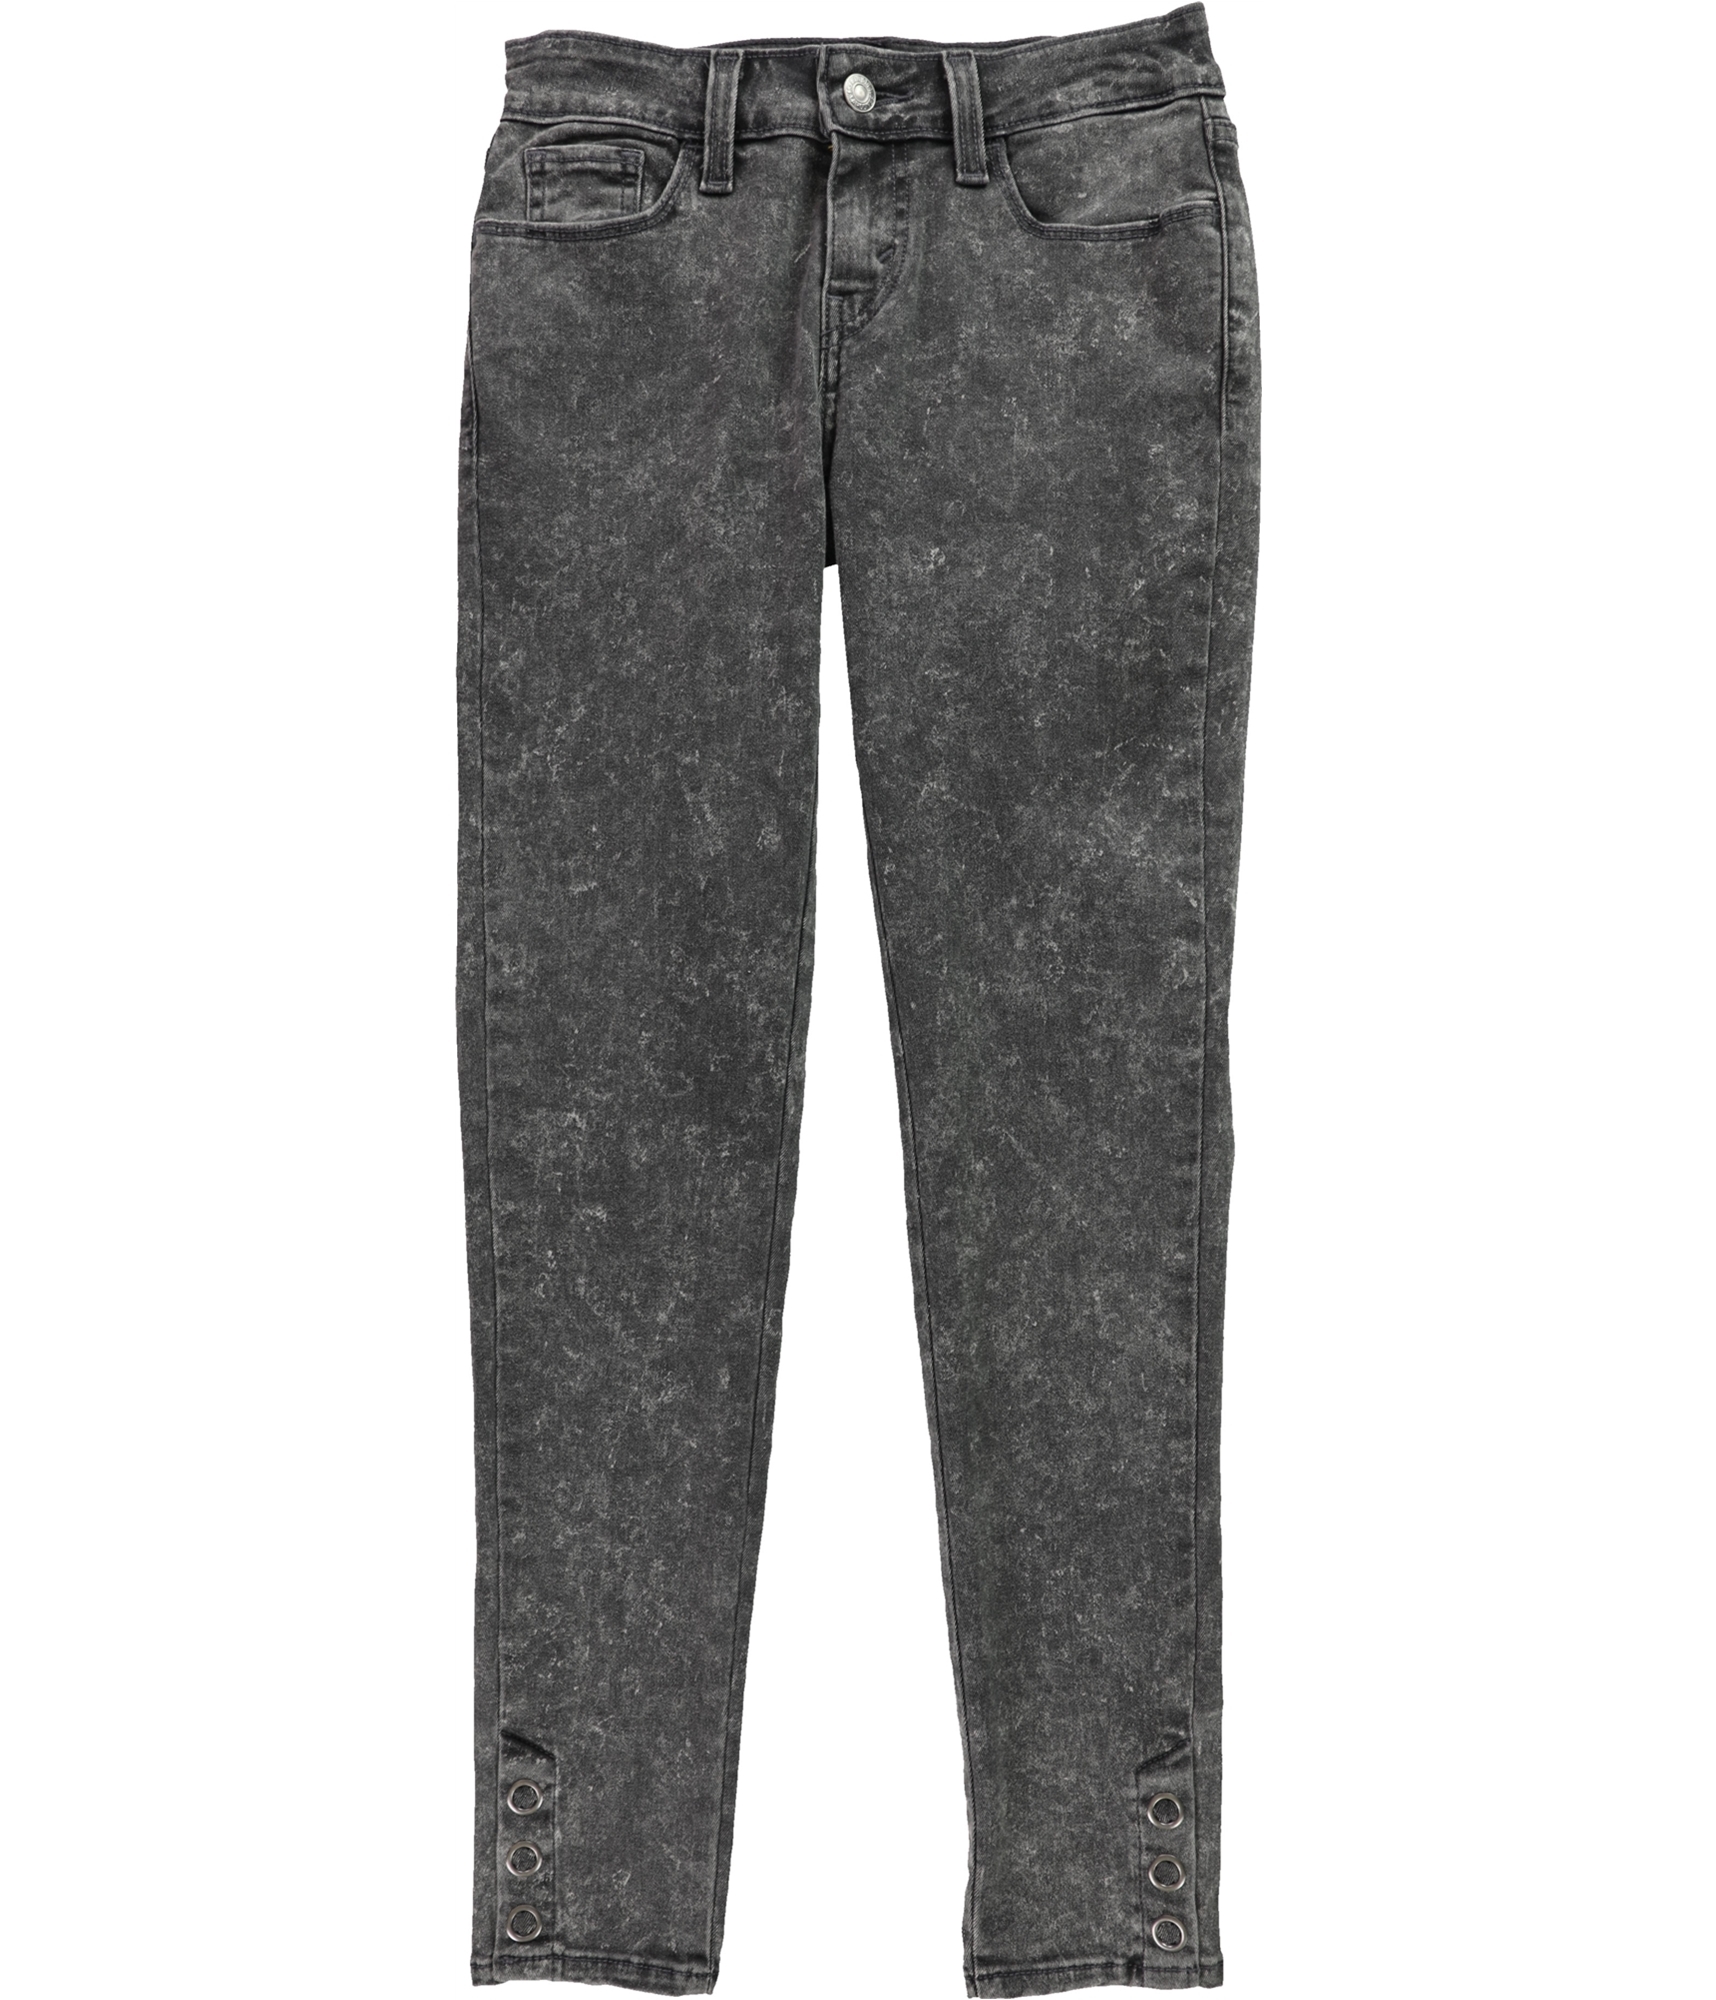 Buy a Womens Levi's Ankle Mid Rise Skinny Fit Jeans Online 